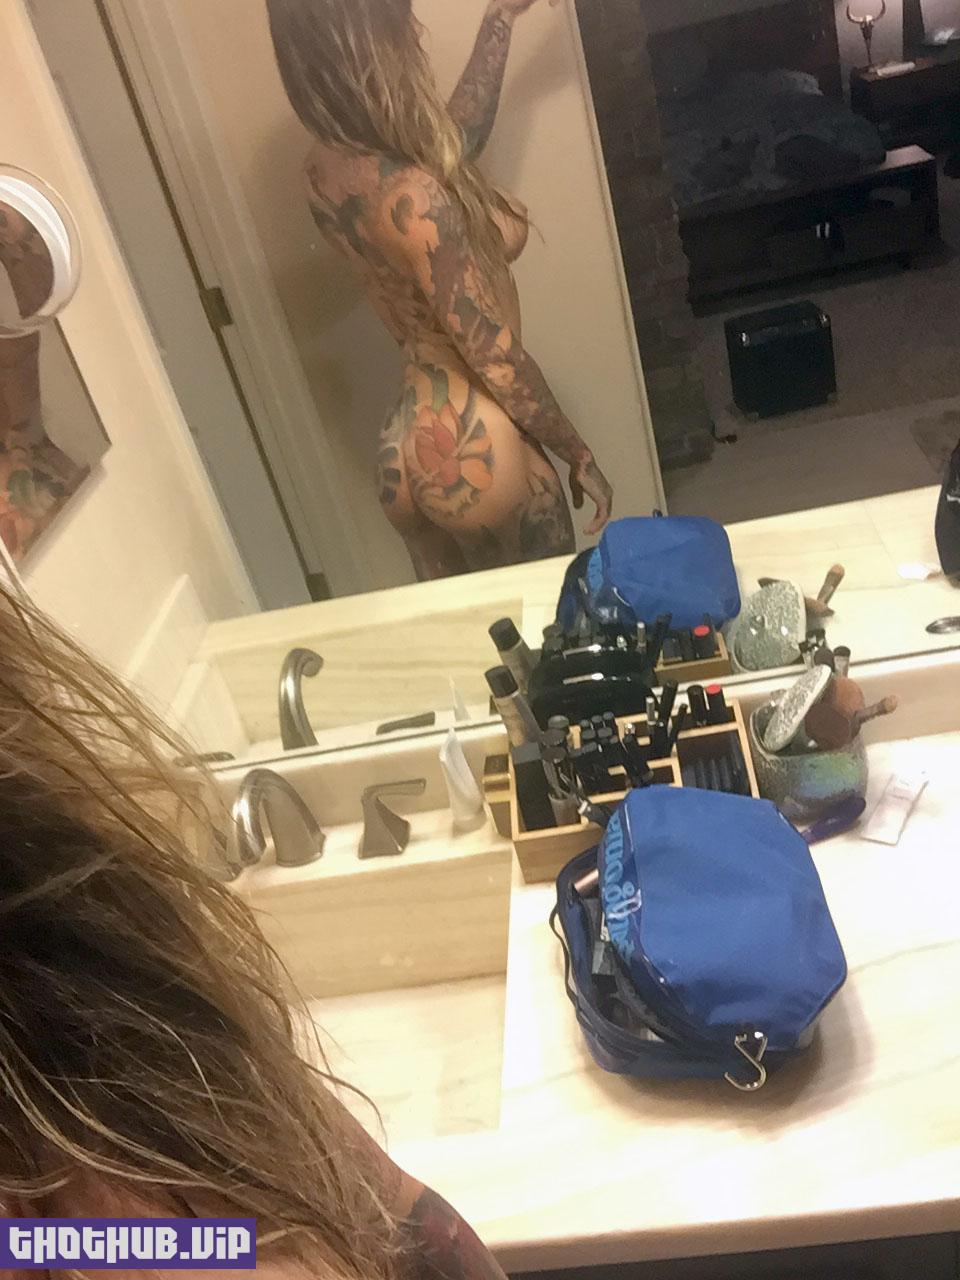 Krissy Mae Cagney Nude Selfies Leaked from iCloud by The Fappening 2018